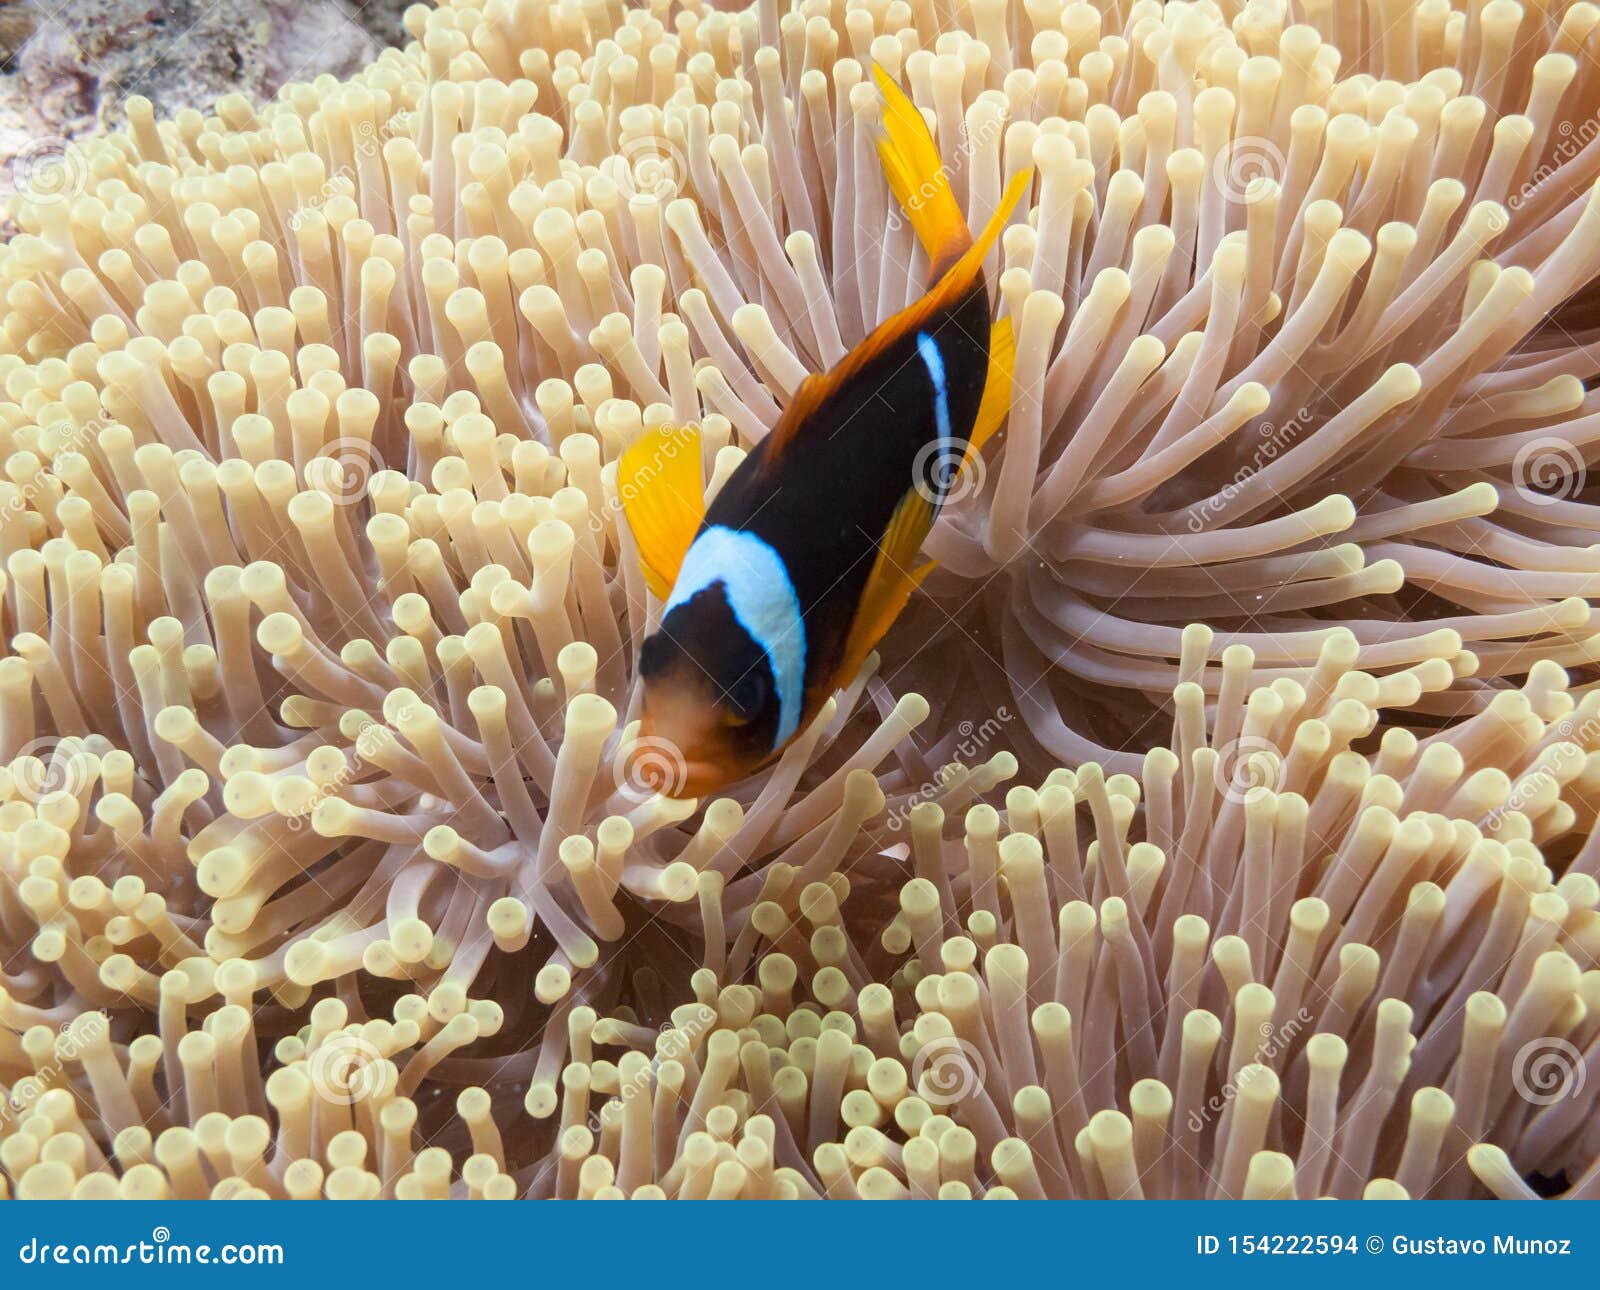 the clownfish amphiprioninae also called anemonefish, next to an sea anemone, in the red sea off the coast of yanbu, in saudi